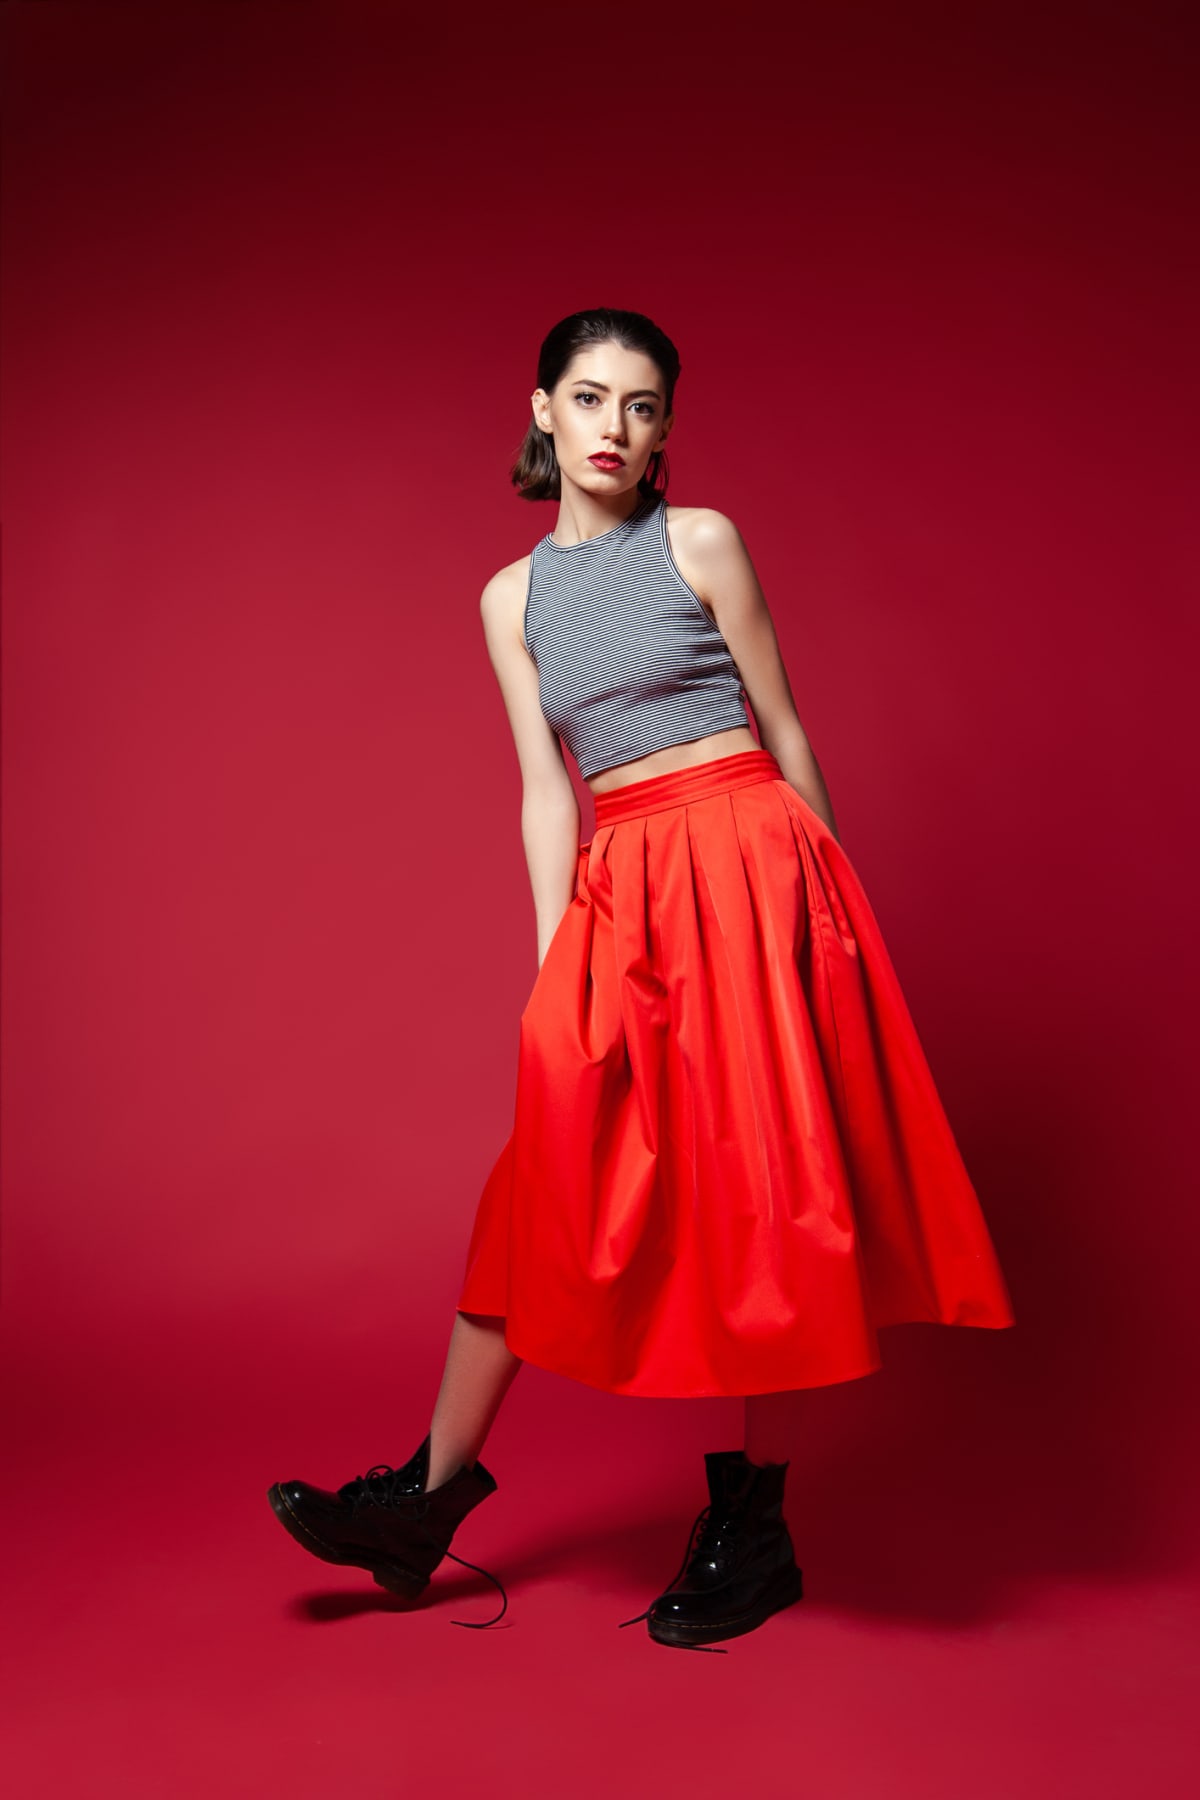 Young slender brunette in long red skirt and black boots balancing on one leg looking at camera on red background